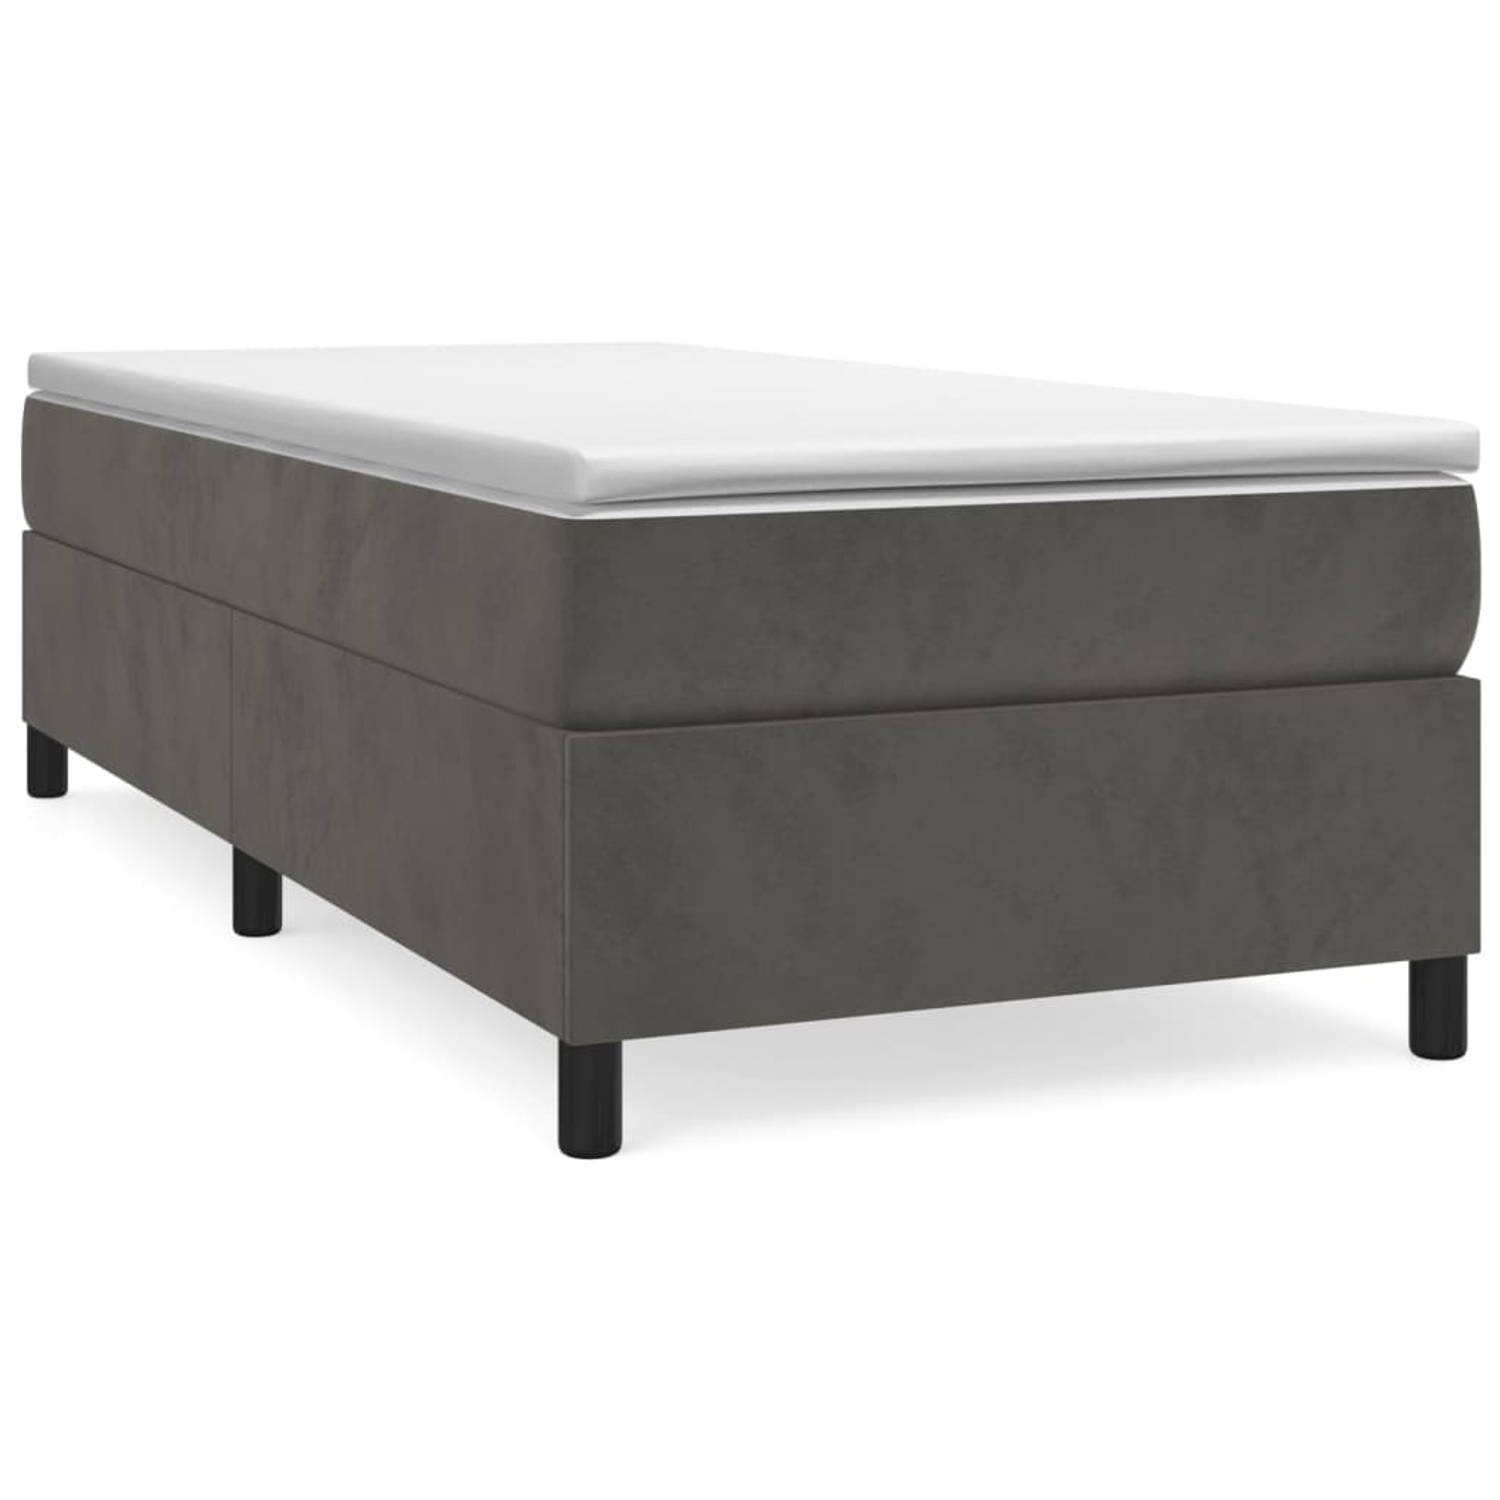 The Living Store Boxspringframe fluweel donkergrijs 90x190 cm - Bed